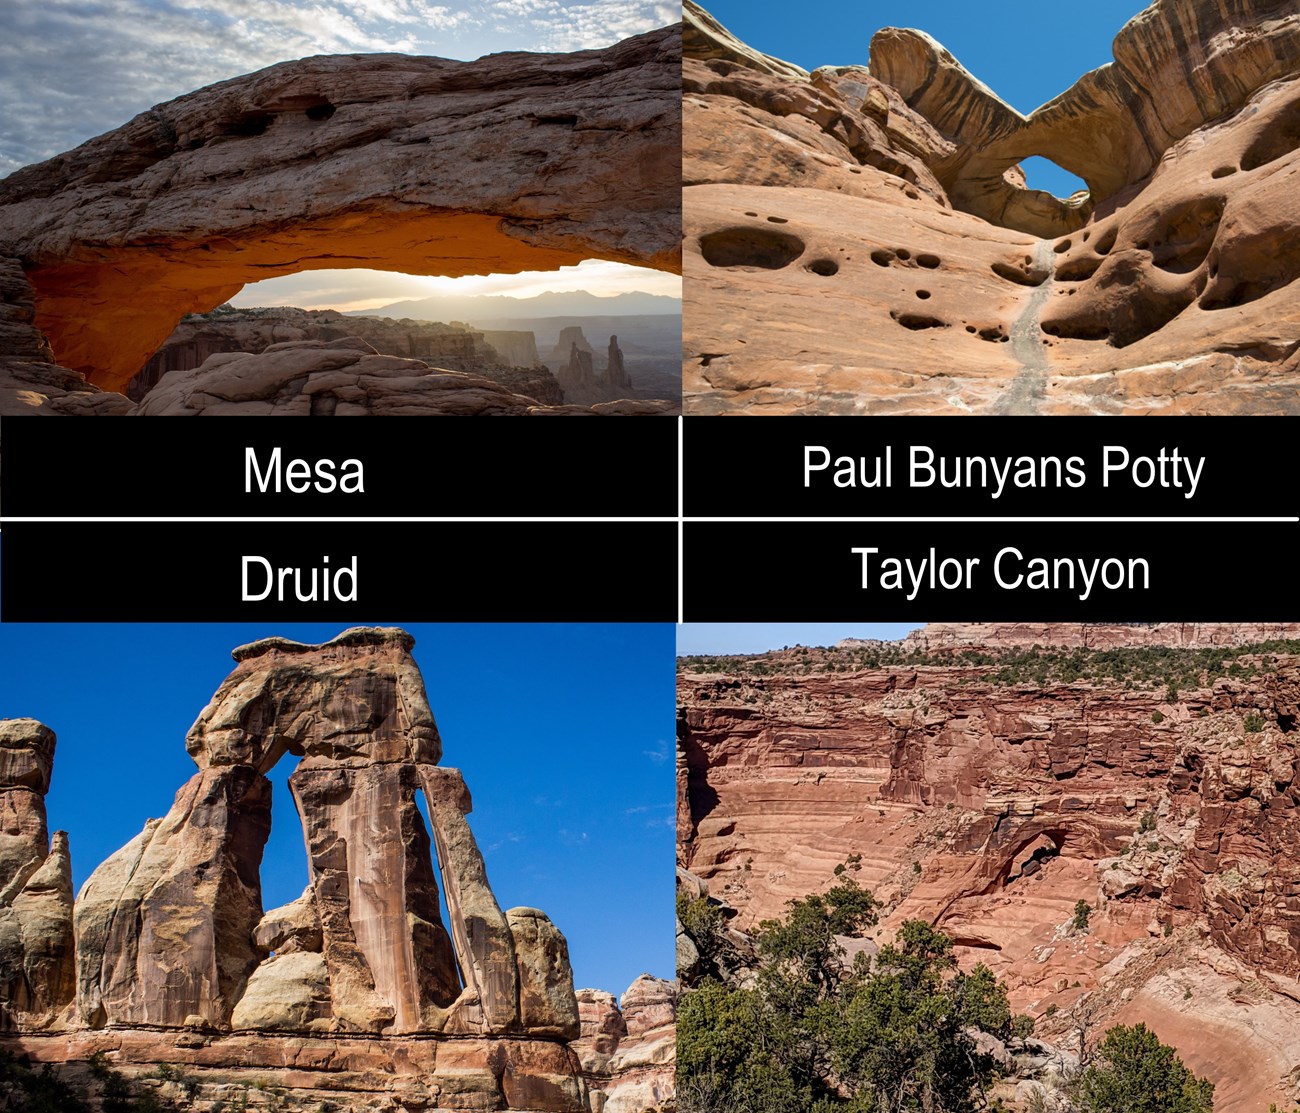 Four arches break the image into fourths. Mesa Arch, Paul Bunyans Potty, Druid Arch, and Taylor Canyon Arch.